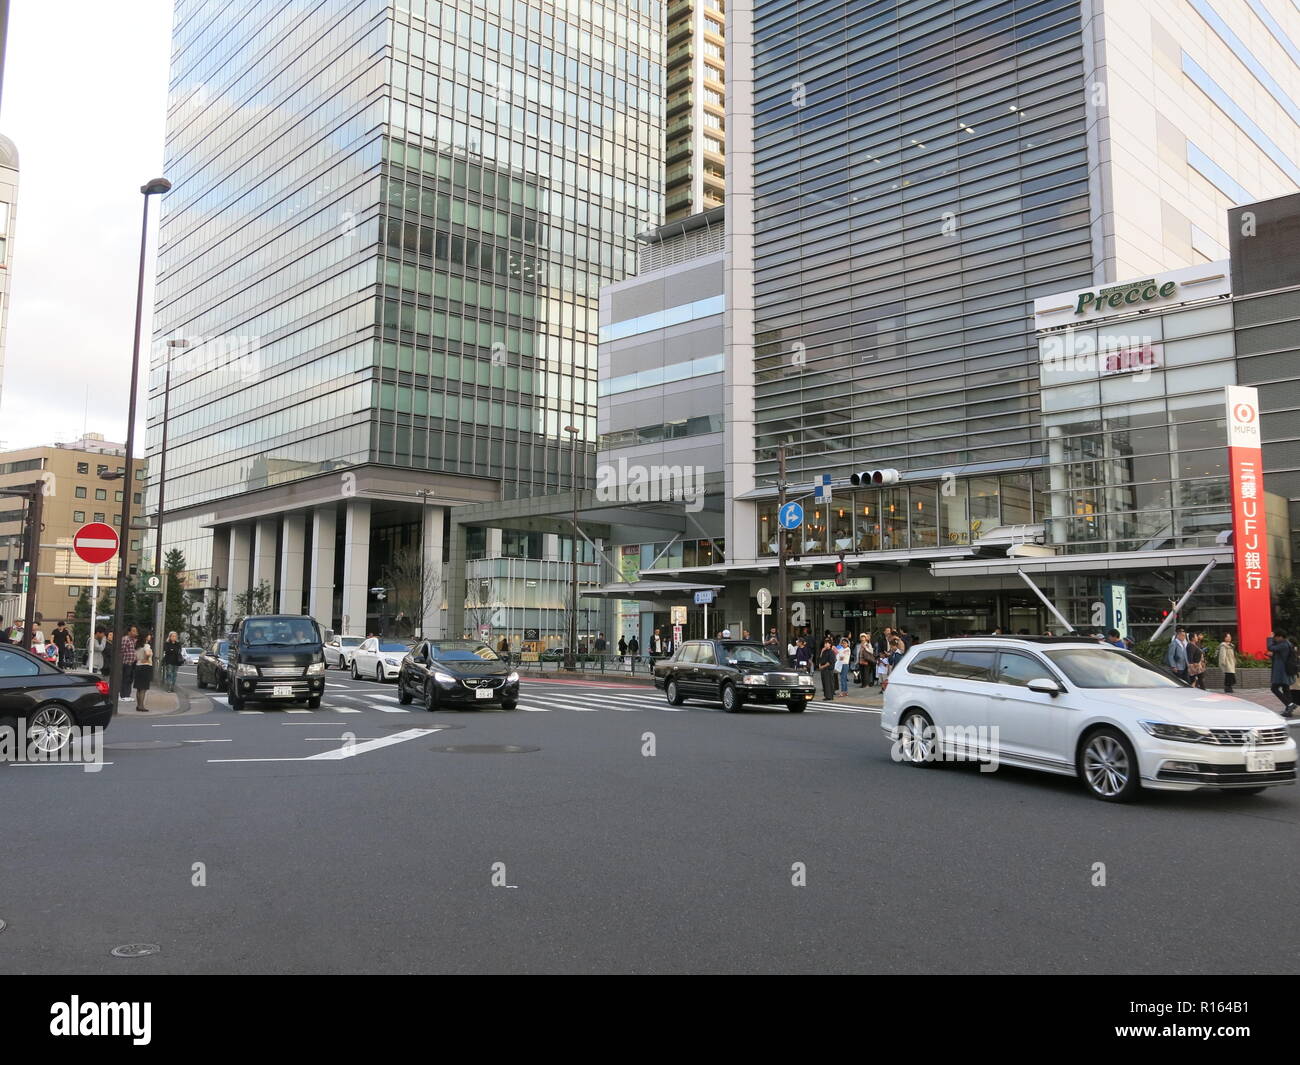 Street scene in central Tokyo showing cars, pedestrians and high-rise buildings Stock Photo